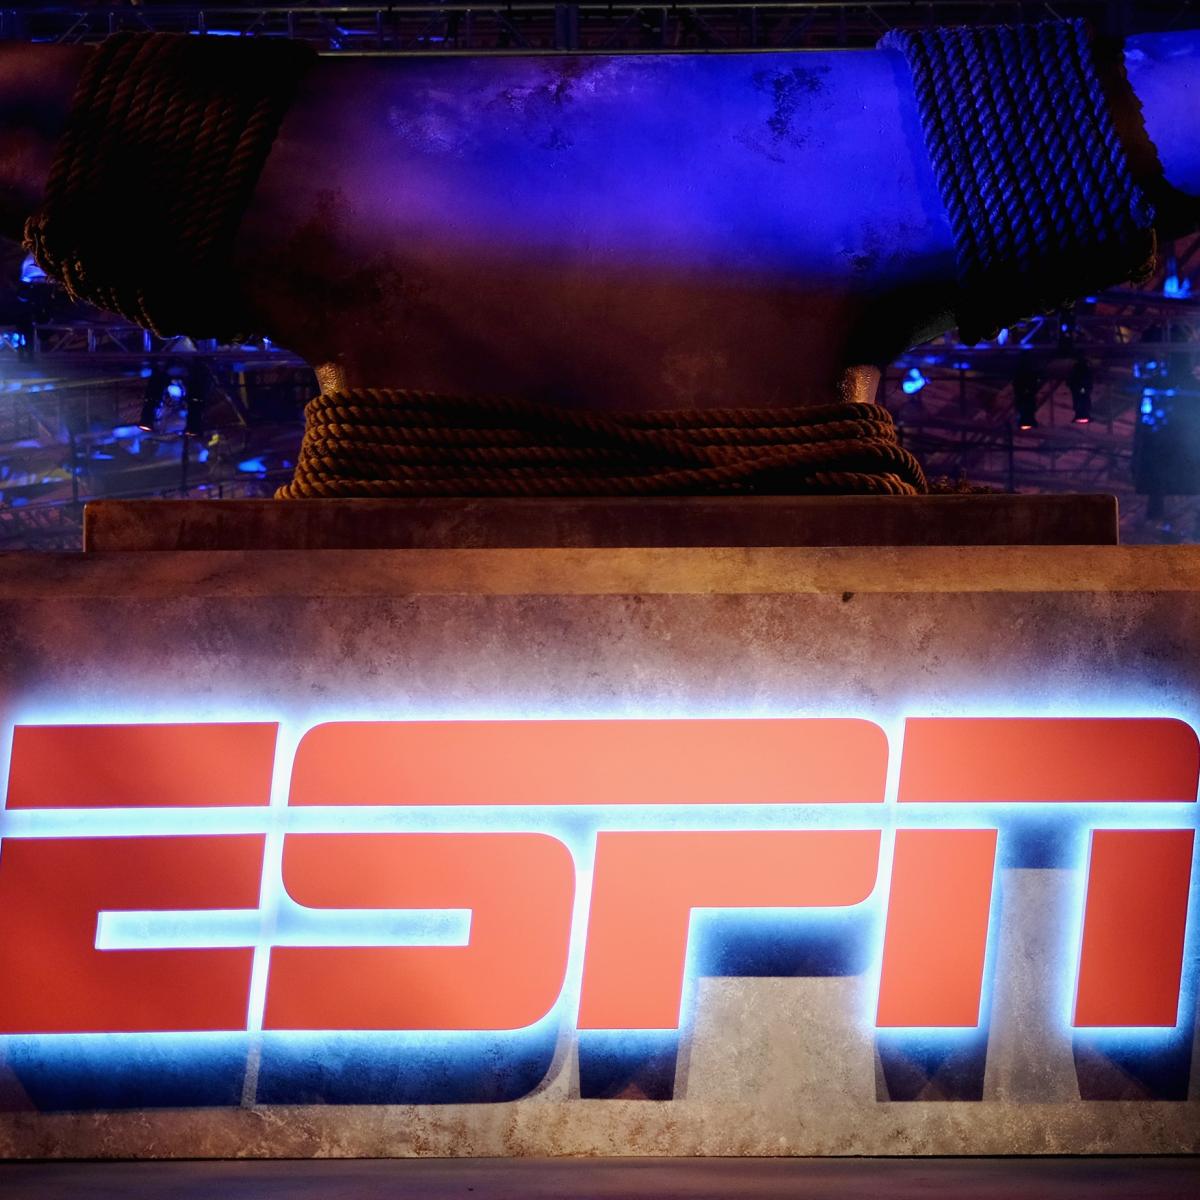 ESPN 8 'The Ocho' Schedule for Game of Thrones' 'The Mountain' and All